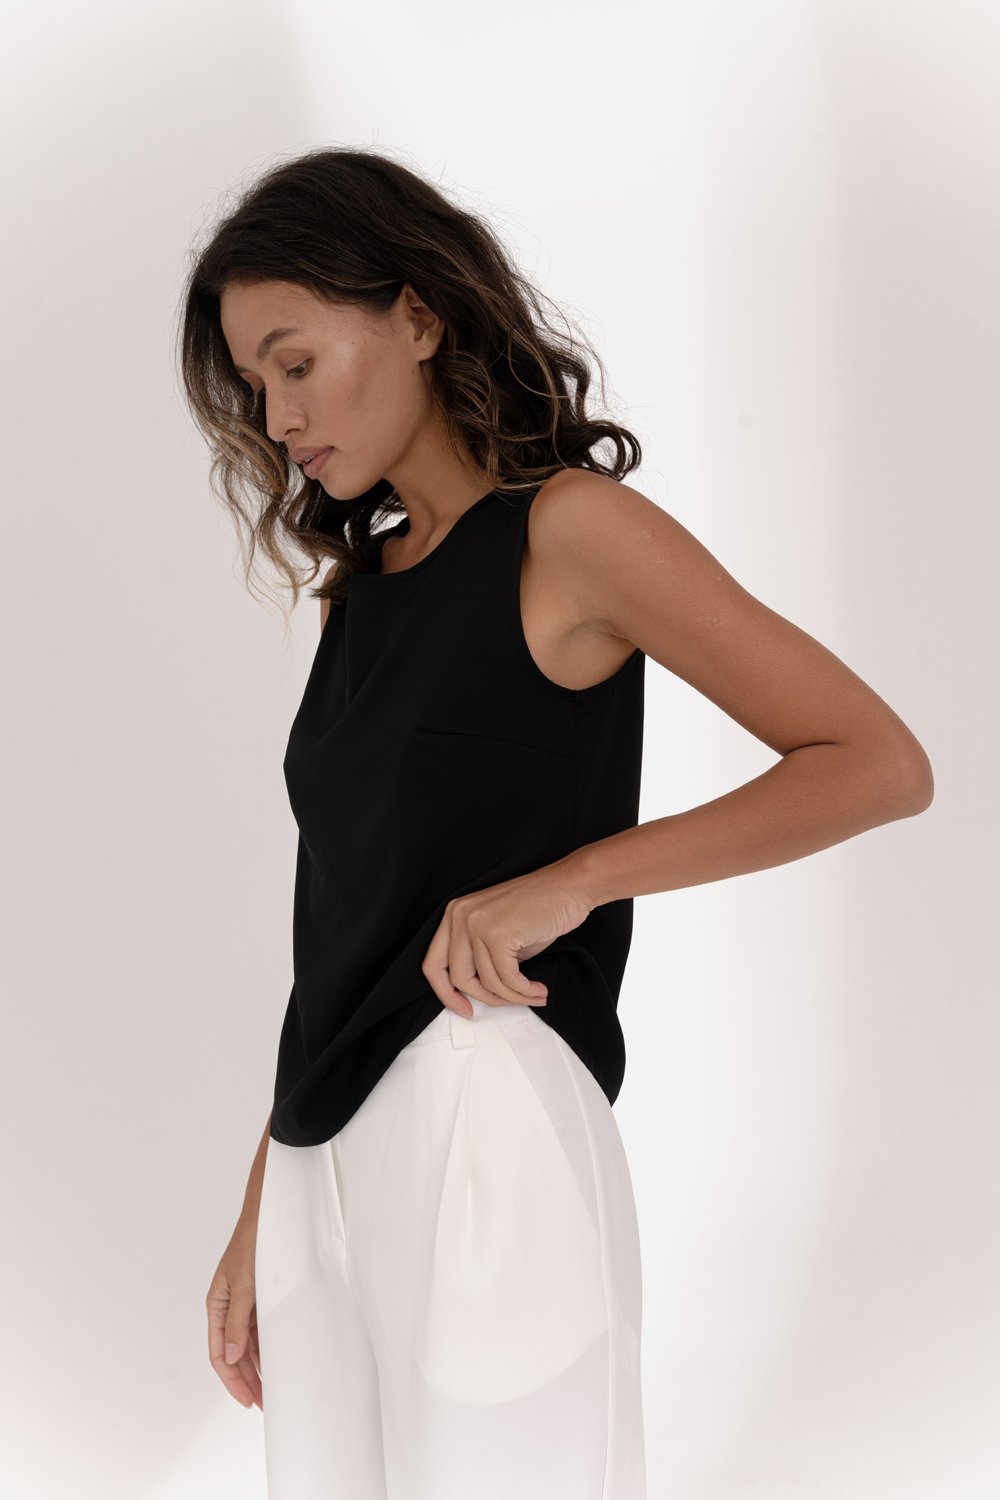 Black sleeveless top with lace insert on the back